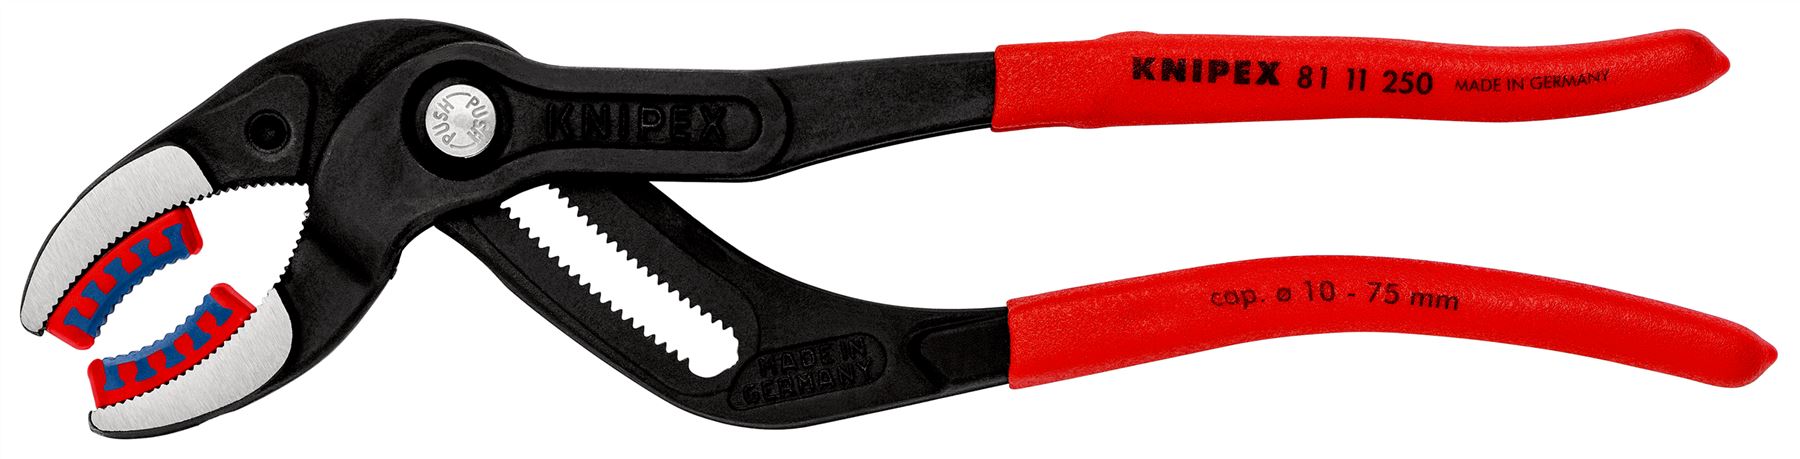 Knipex Siphon and Connector Water Pump Pliers 250mm with Plastic Jaws 81 11 250